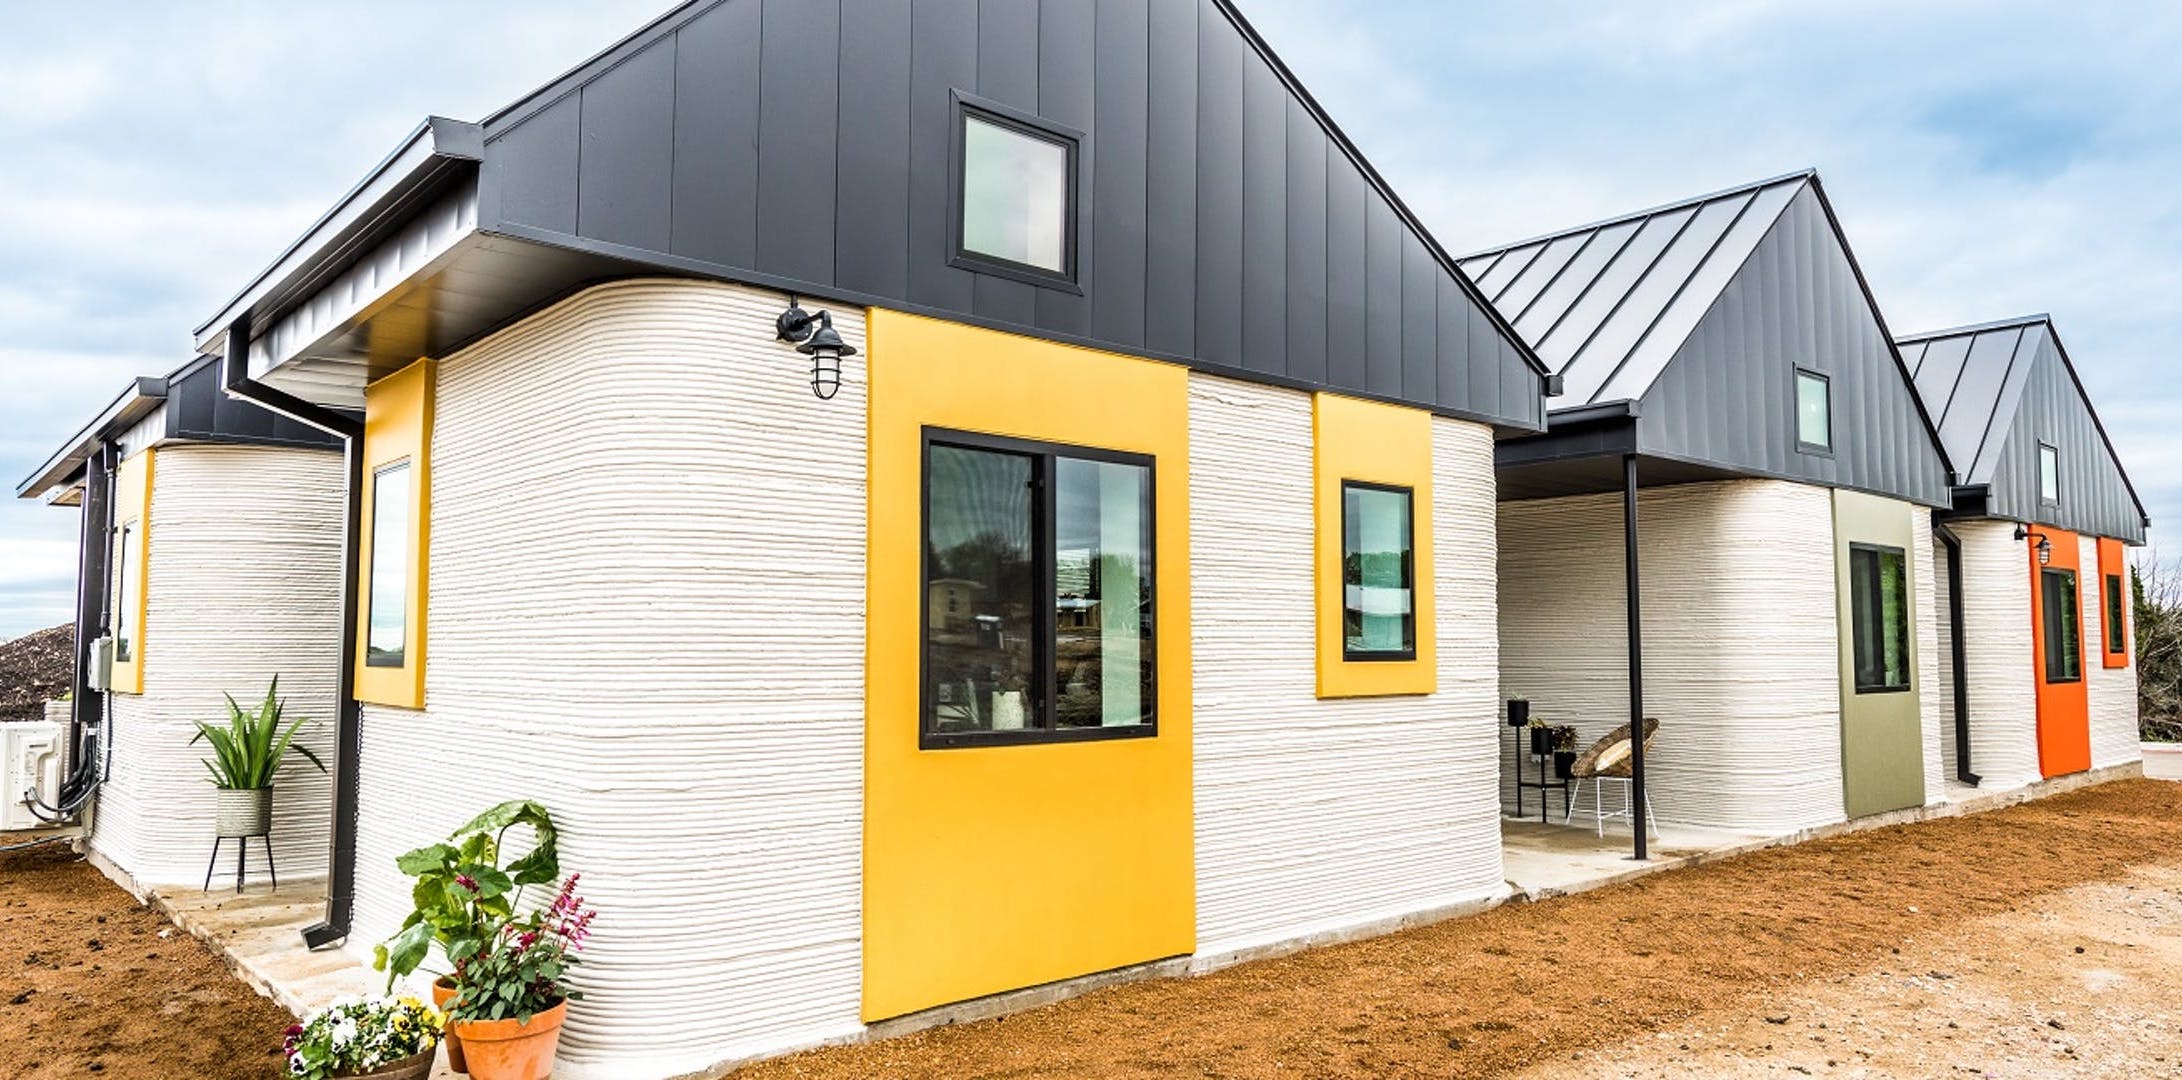 3D printed houses completed for Austins homeless 